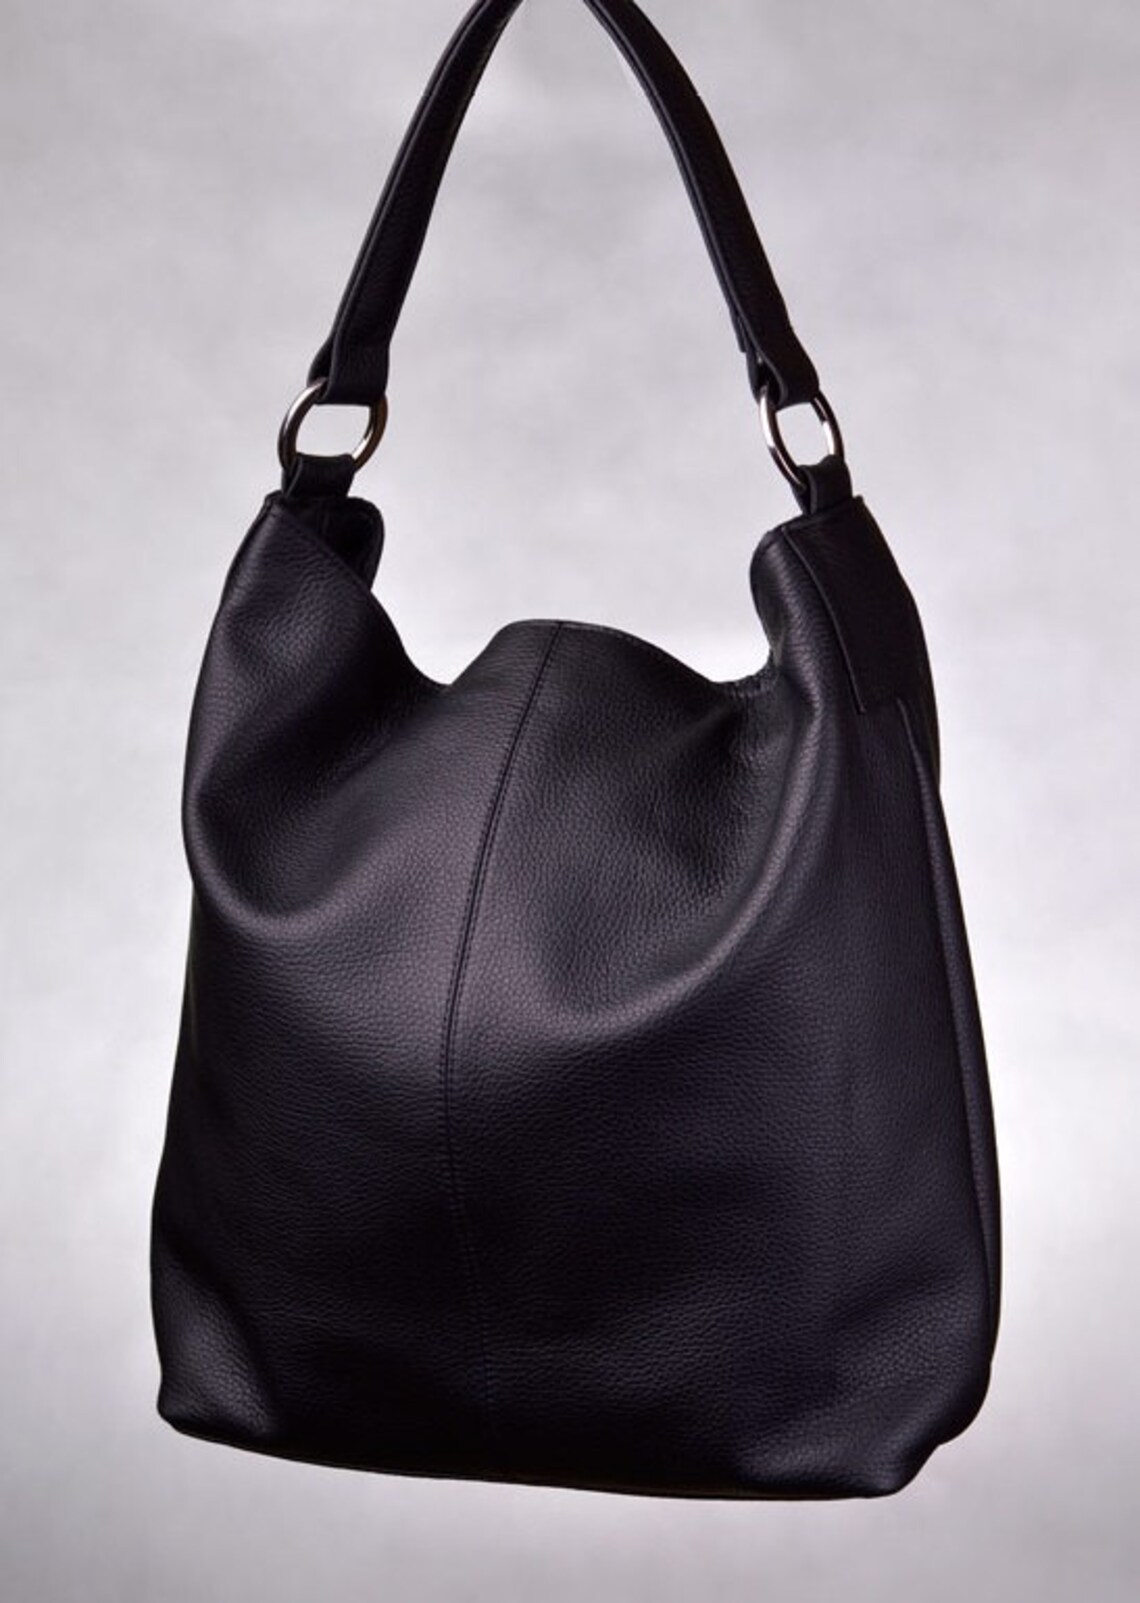 Huge Leather Tote HOBO With Long Strap Black Color - Etsy